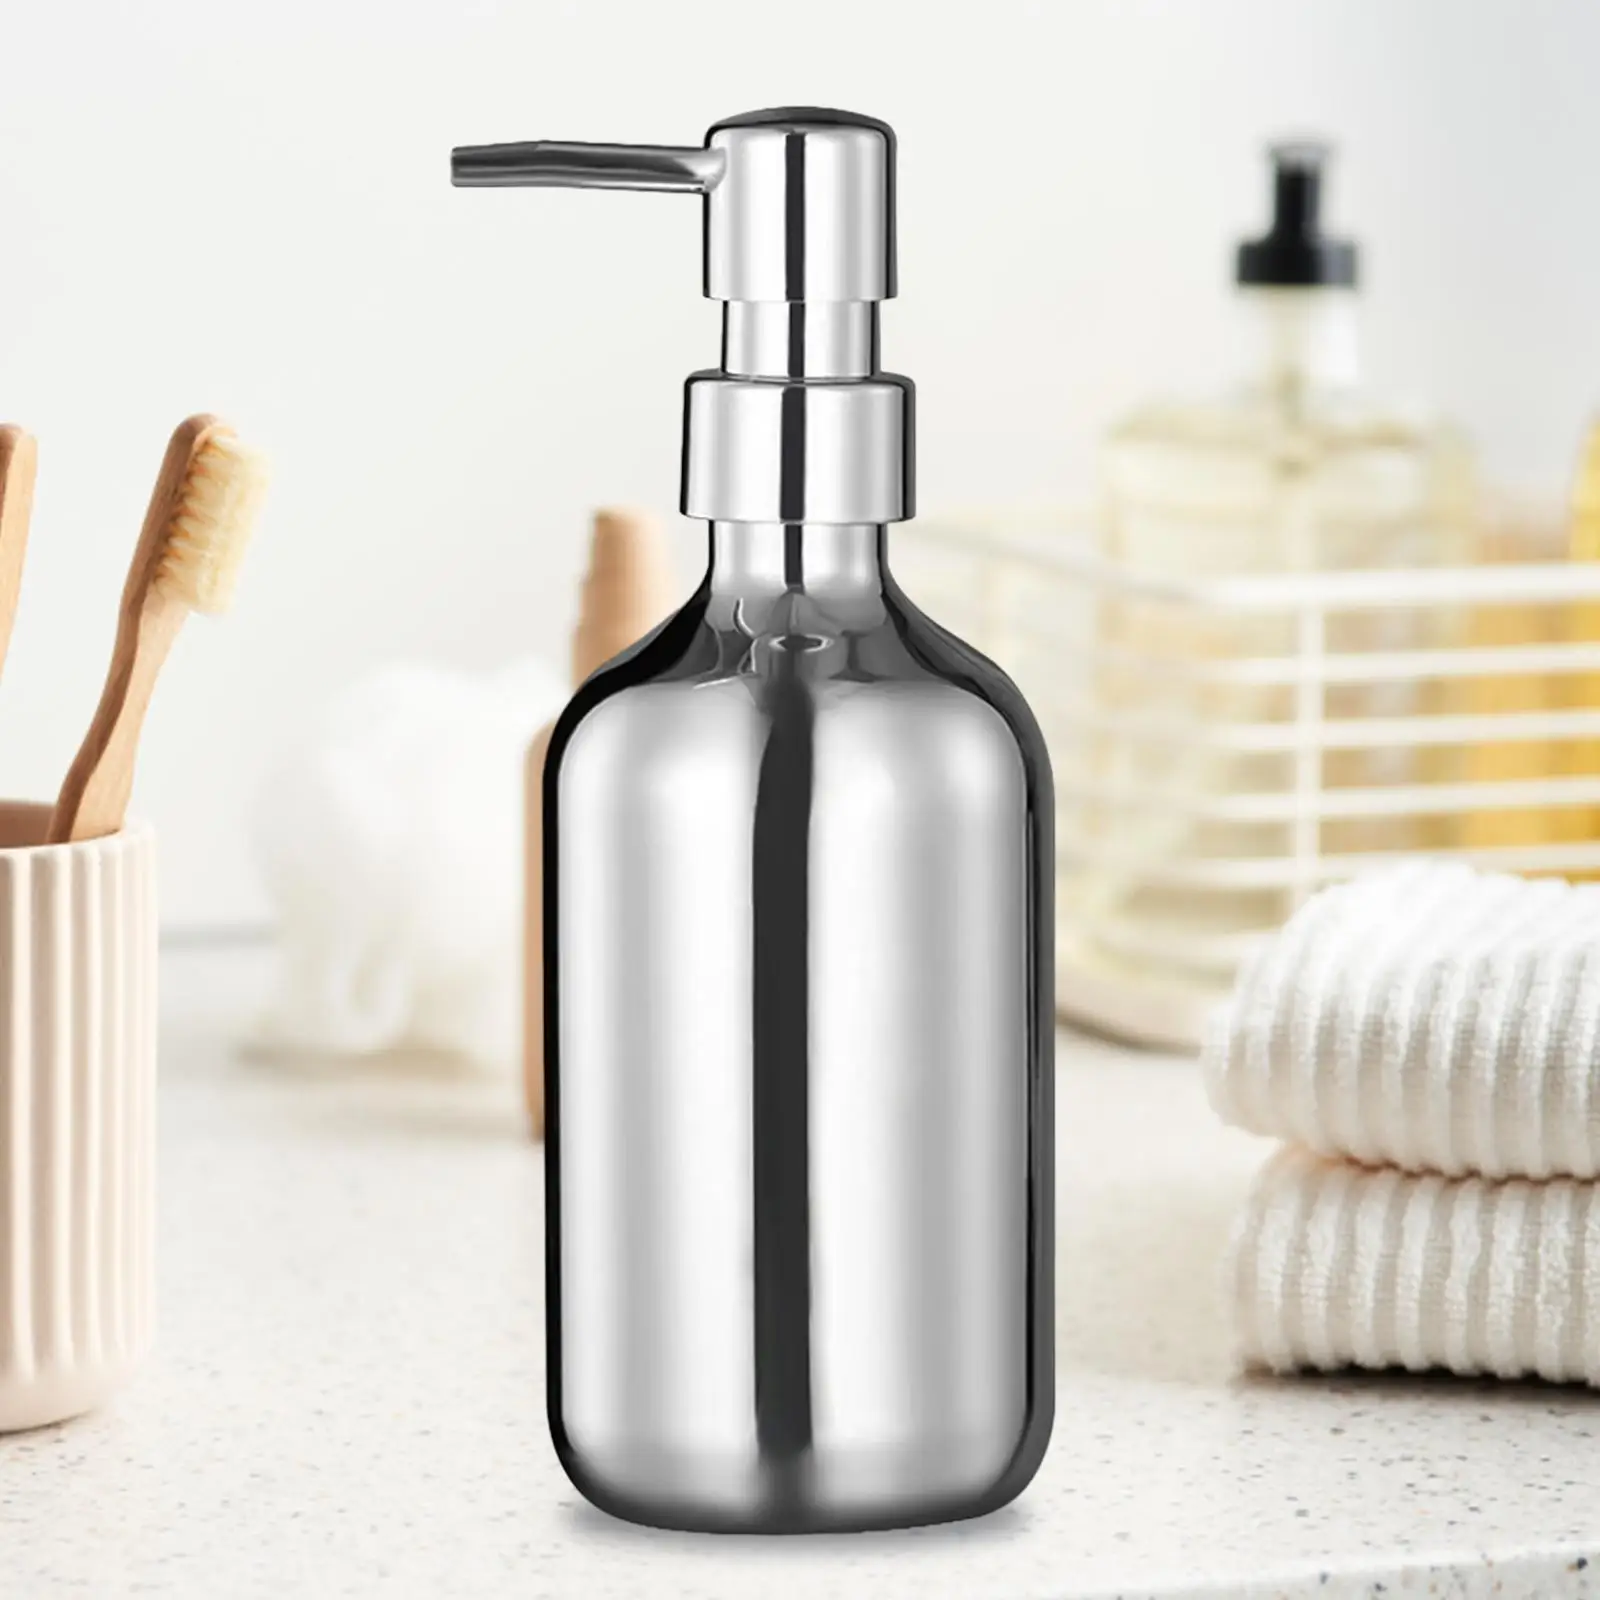 Soap Dispenser mirror 500ml for Dining Room Body Washes Liquid Soap